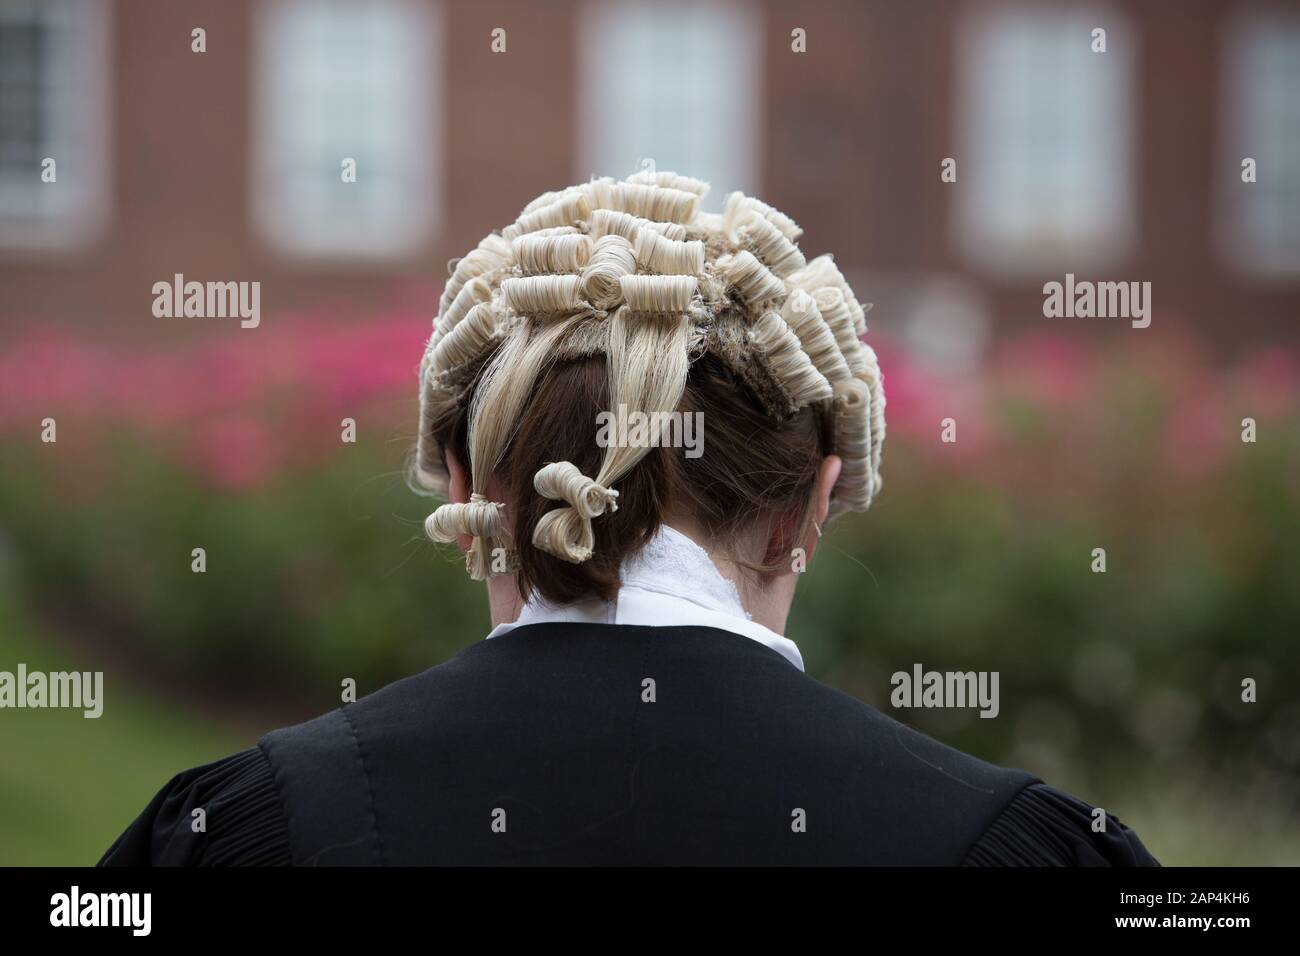 A wig, as worn by some judges and barristers in England and Wales, also known as a peruke. It is being worn by a woman. Stock Photo